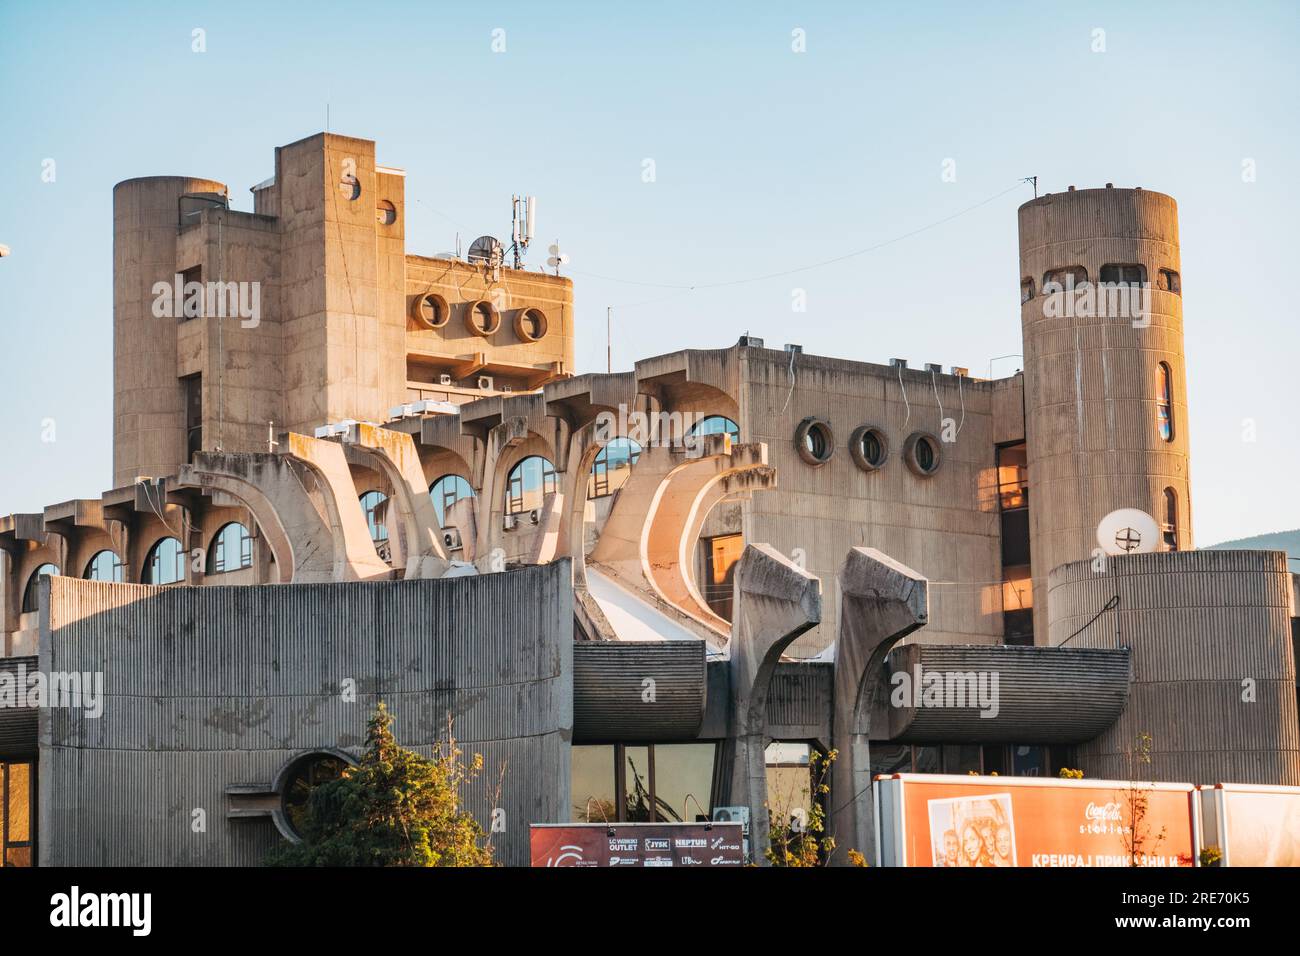 The highly unusual looking Central Post Office in Skopje, North Macedonia. A quirky, brutalist architecture style, completed in 1989 Stock Photo